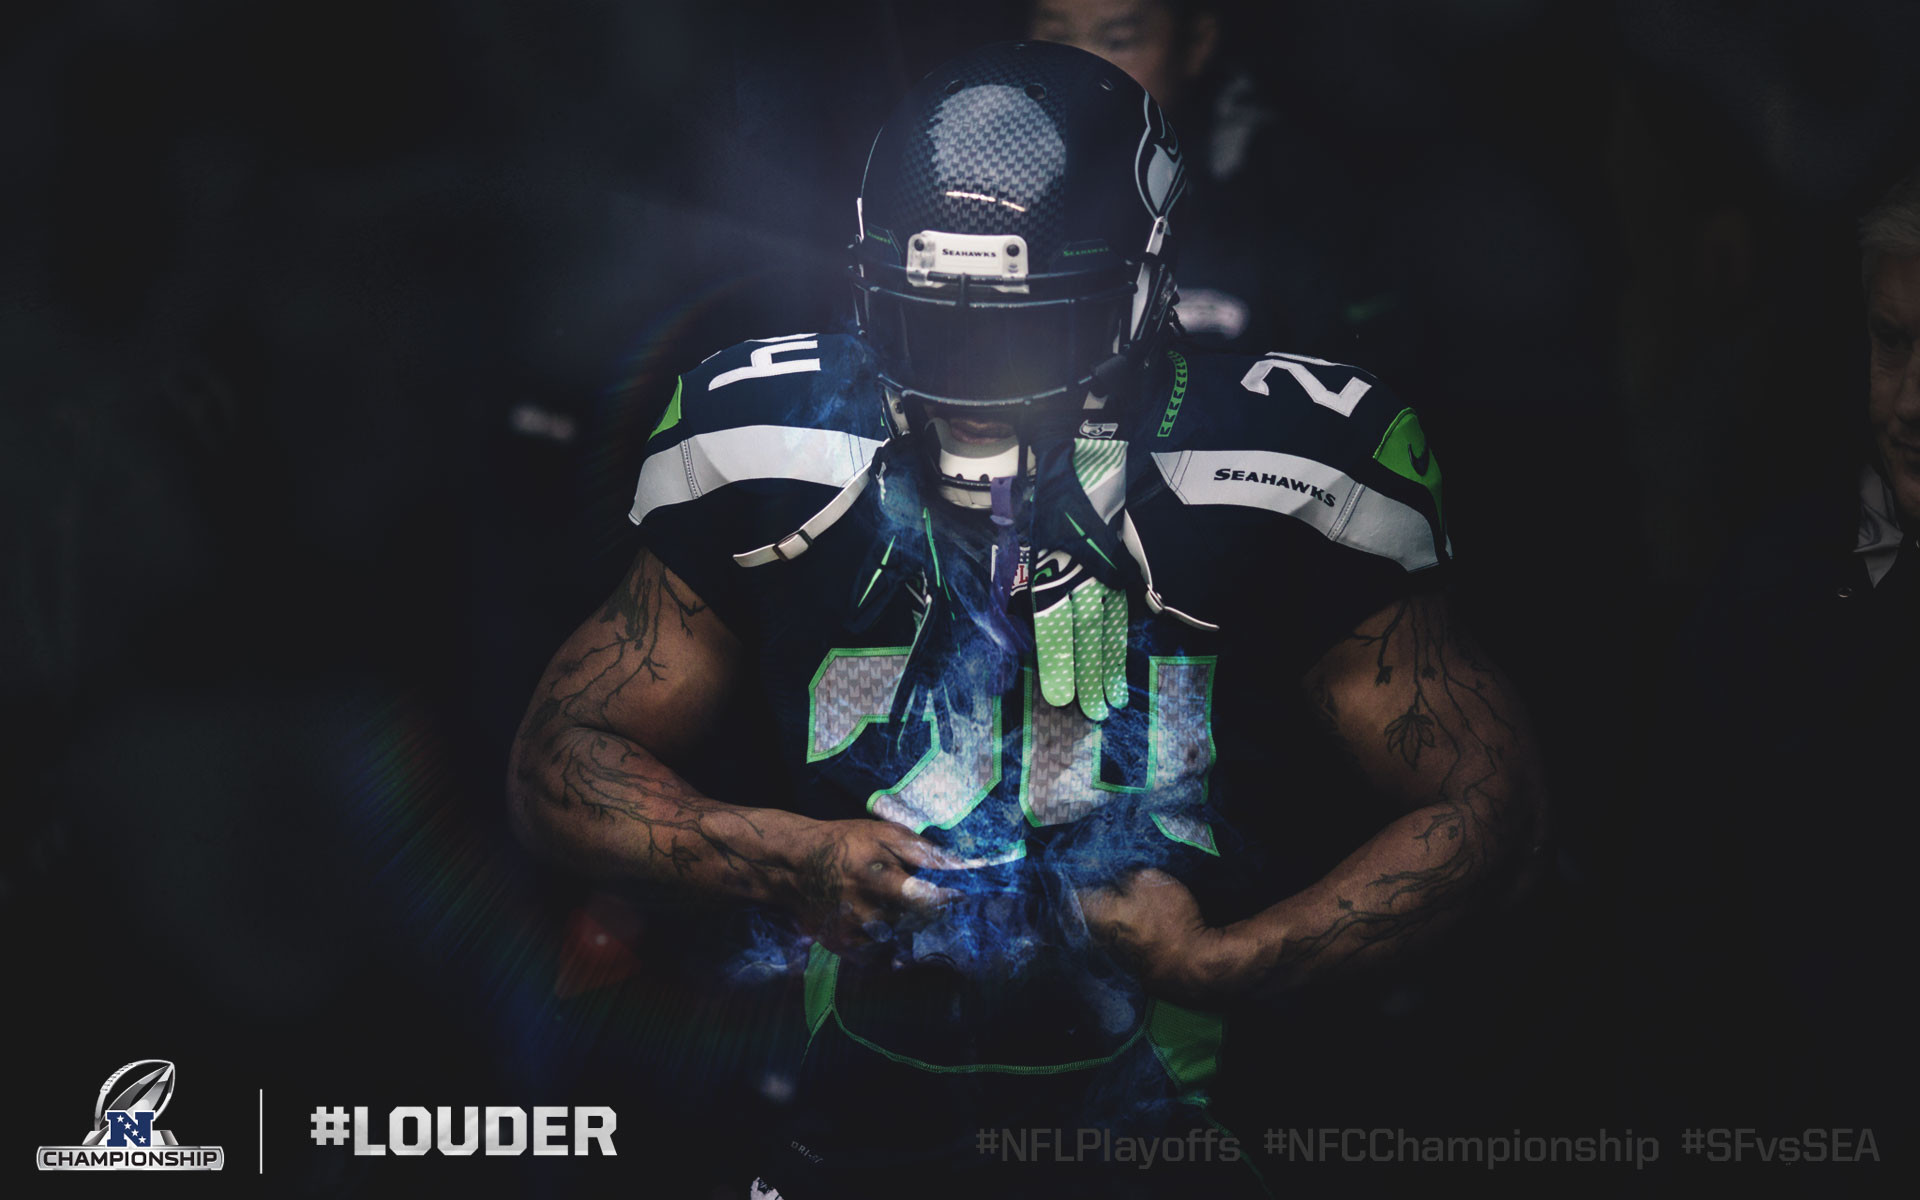 1920x1200 This is Marshawn Lynch and he motivates me to do better at everything and  to not pay attention to the little problems in life. Just lay back, mind  your own ...